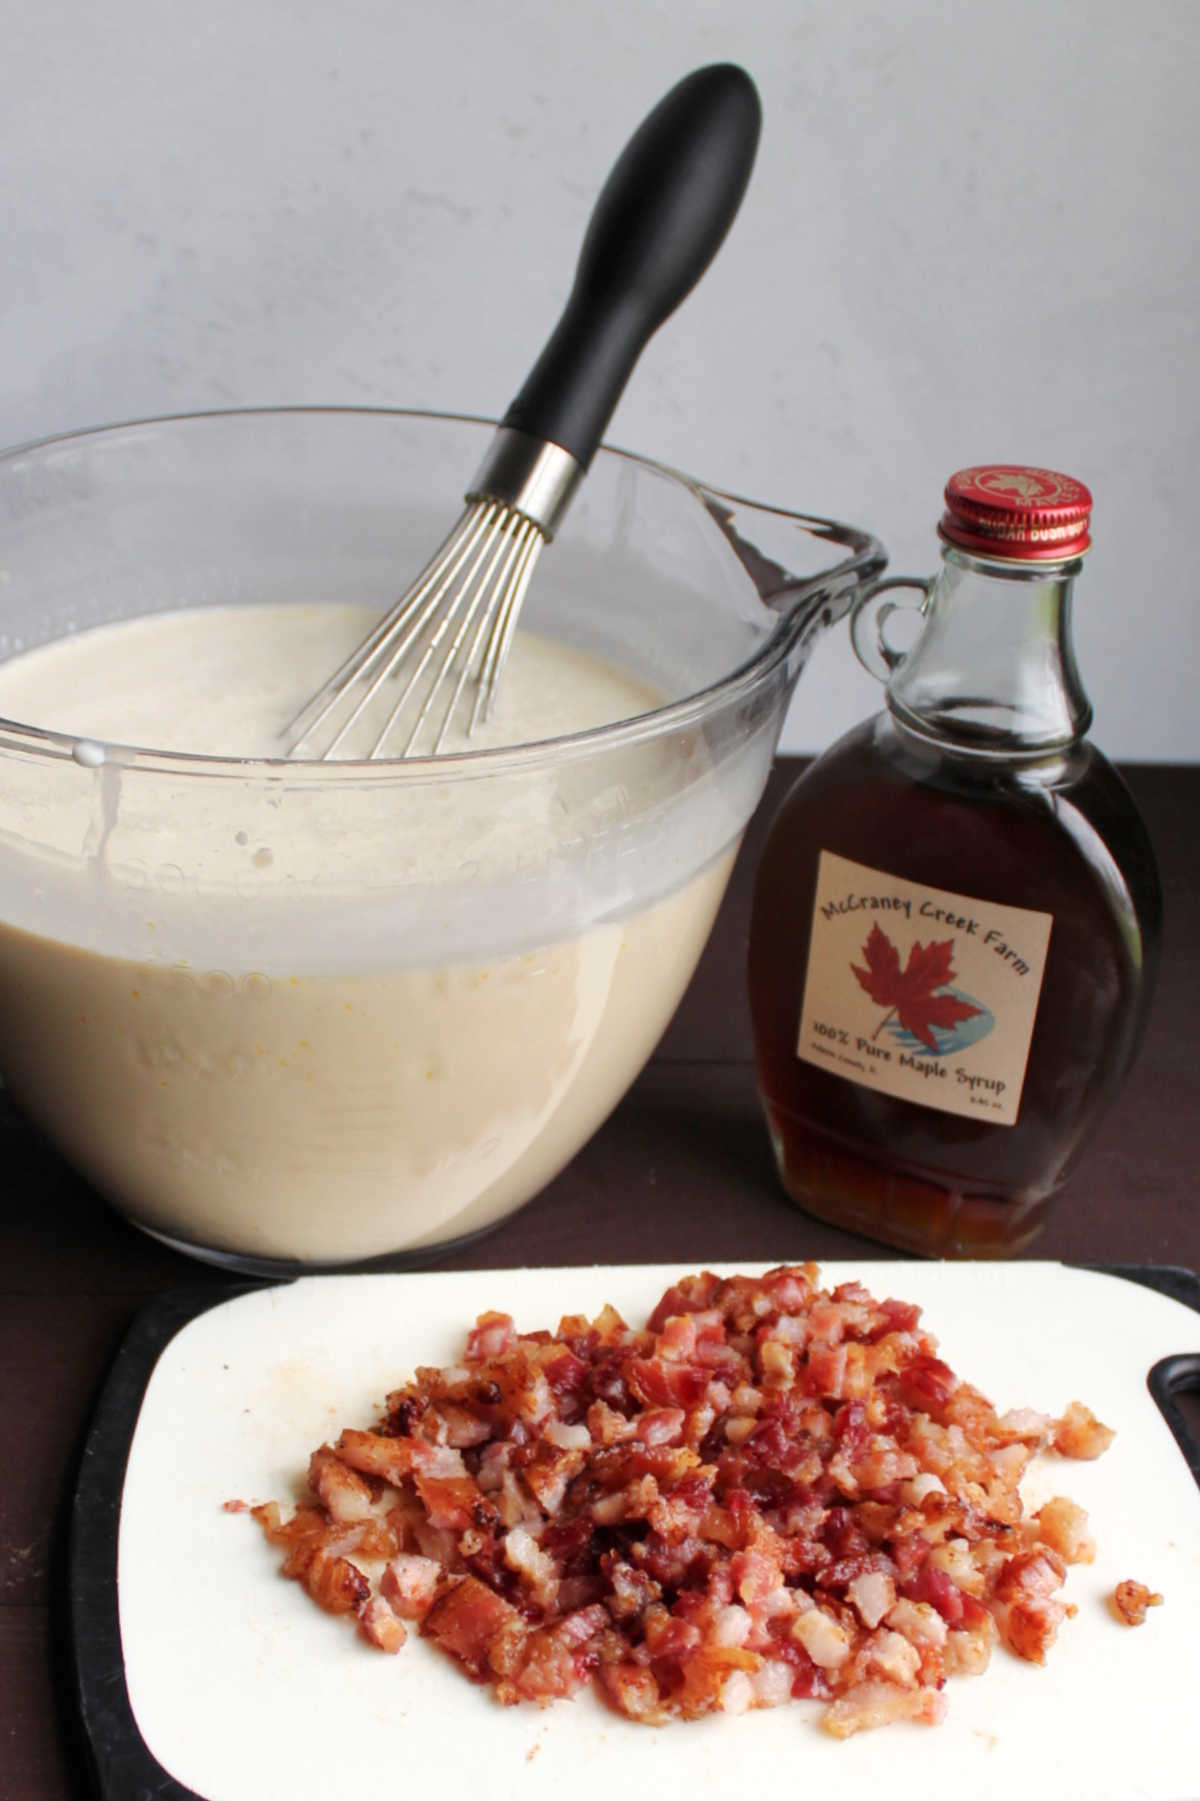 Big glass bowl of ice cream base next to a pile of chopped bacon and bottle of maple syrup.